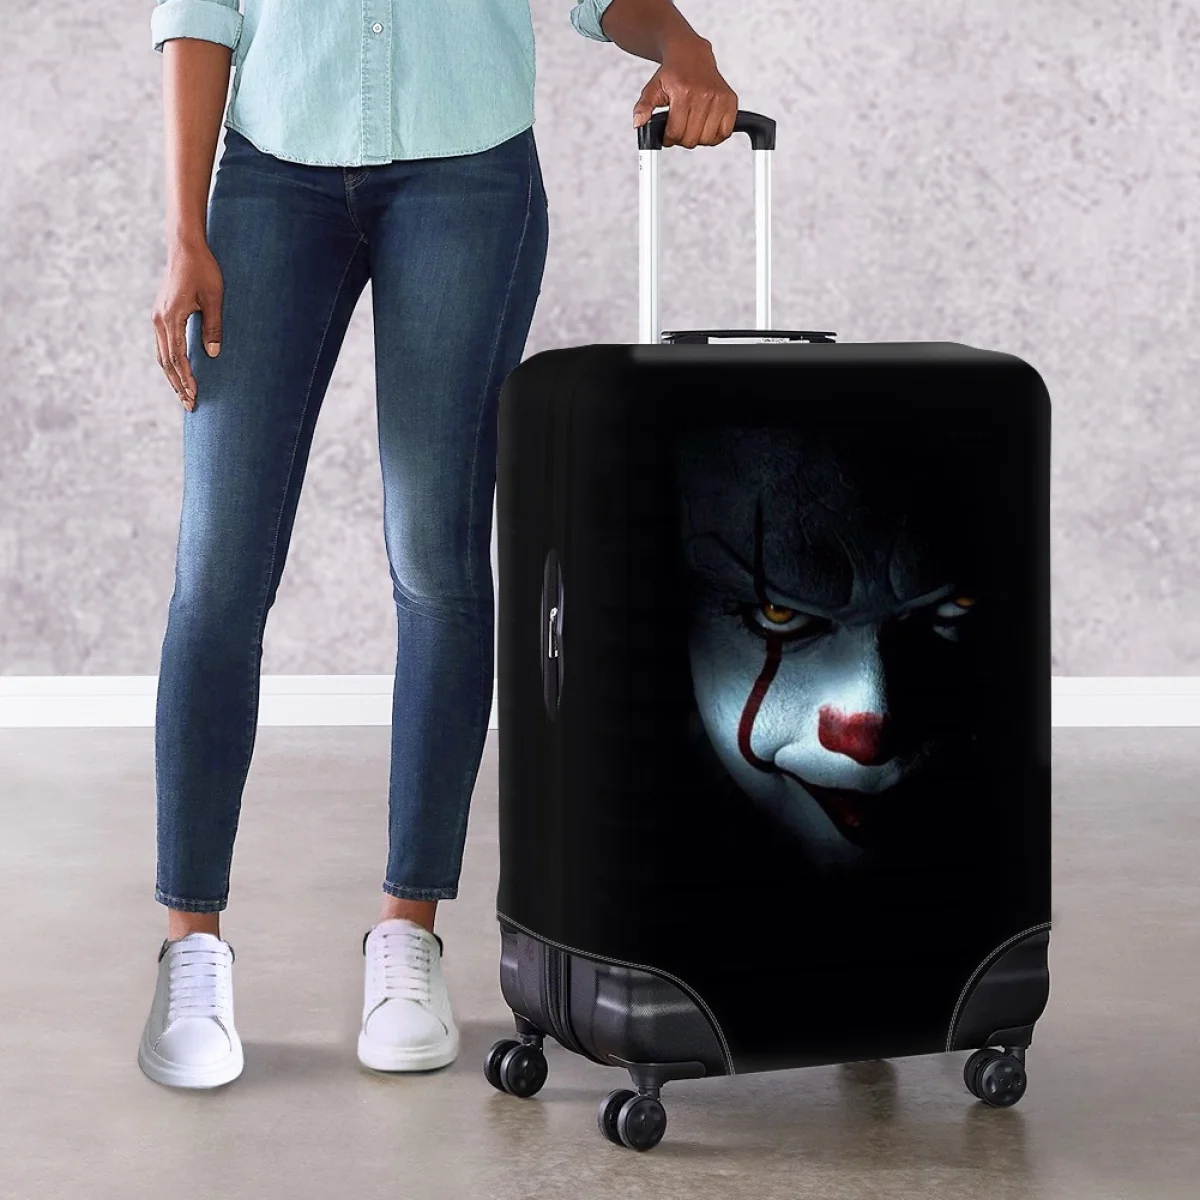 

Twoheartsgirl Clown Travel Suitcase Protective Cover Fits 18''-32'' Luggage Elastic Trolley Case Dust Covers Scratch Resistant